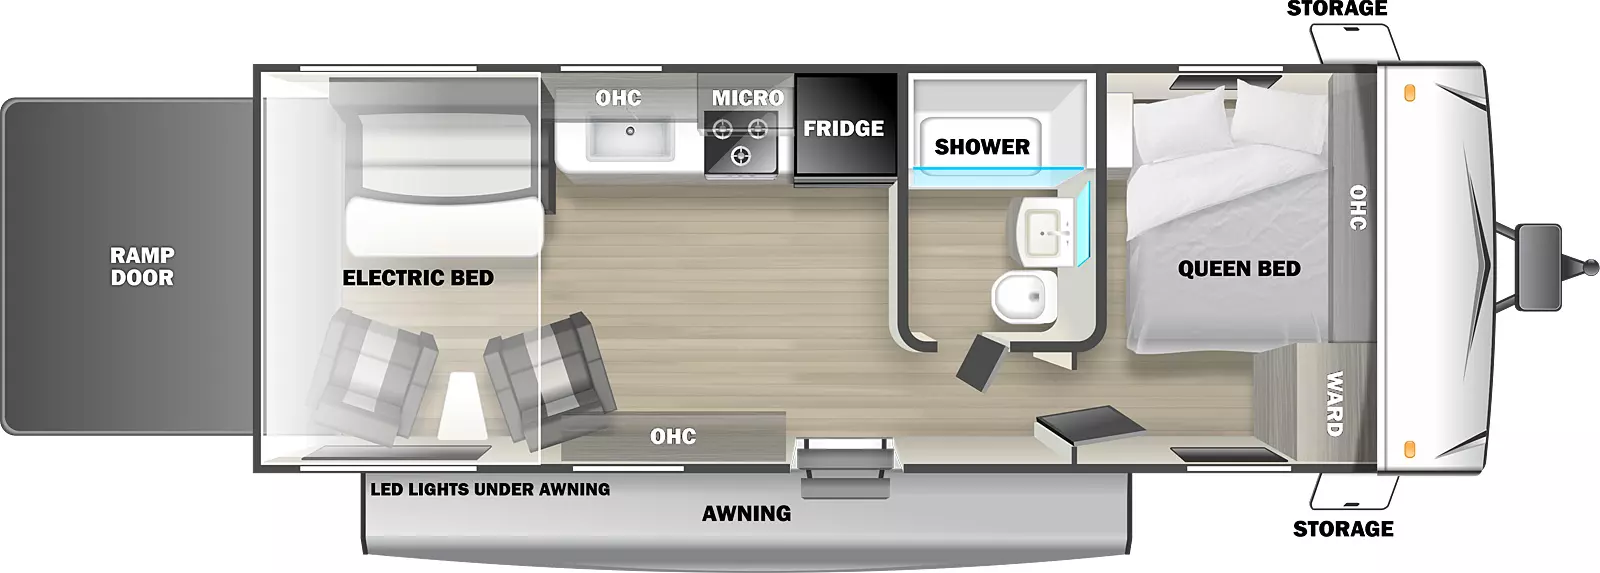 The Sandstorm 211SLC Toy Hauler has one entry door, a rear ramp door, and an electric awning. Pass through storage is near the front of the RV. The RV has 13 foot 4 inch cargo space. The entry door leads to a living area on the left and a hallway on the right. To the left of the overhead storage are two chairs with a table between them. A ramp door makes up the rear wall of the RV. Opposite the chairs is a flip sofa with a table. A kitchen area is to the right of the sofa. The kitchen has a countertop with a sink and a stove. Overhead storage is above the sink and a microwave is above the stove. A refrigerator is to the right of the stove. A hallway is to the right of the entry door. The hallway has a door on the left leading to the bathroom. The bathroom has a tub shower, a sink, and a toilet. Straight ahead in the hallway is a door leading to the bedroom. The night stand is in the rear off door corner of the bedroom. A queen bed is in the front off door corner. Overhead storage is above the bed. A wardrobe is in the front door side corner of the living room.